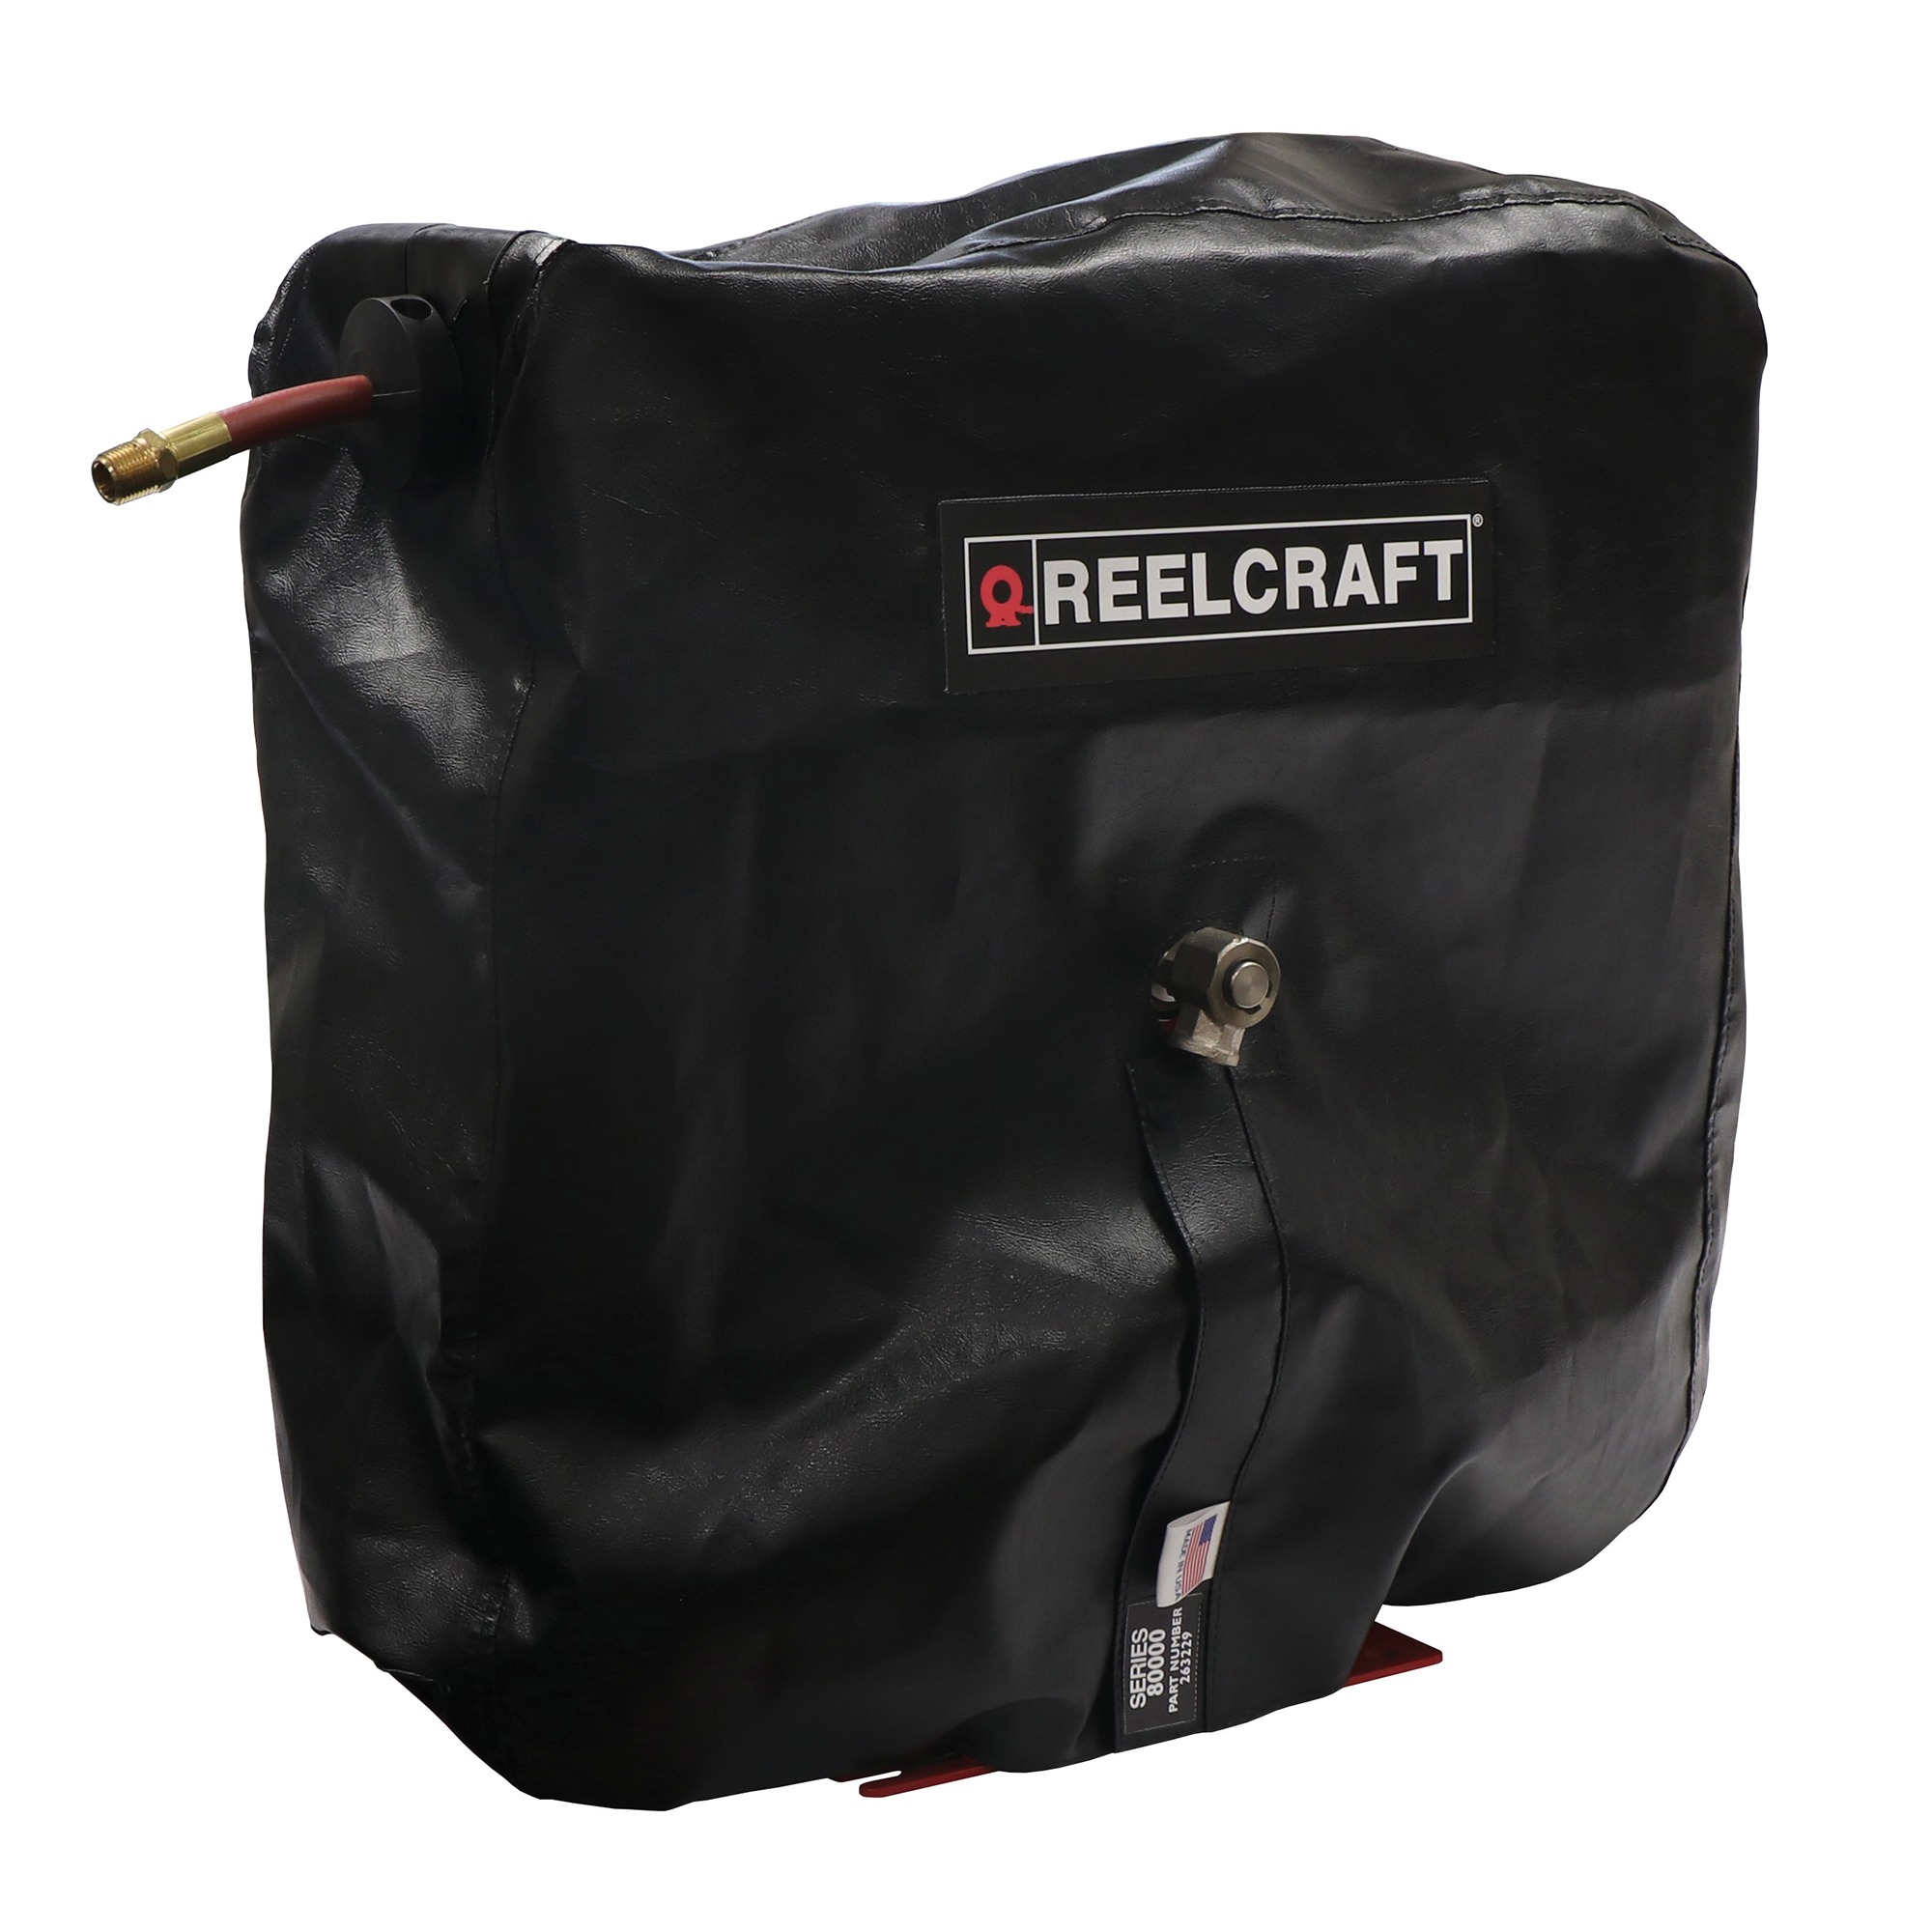 Reel Protective Covers - Hose, Cord and Cable Reels - Reelcraft